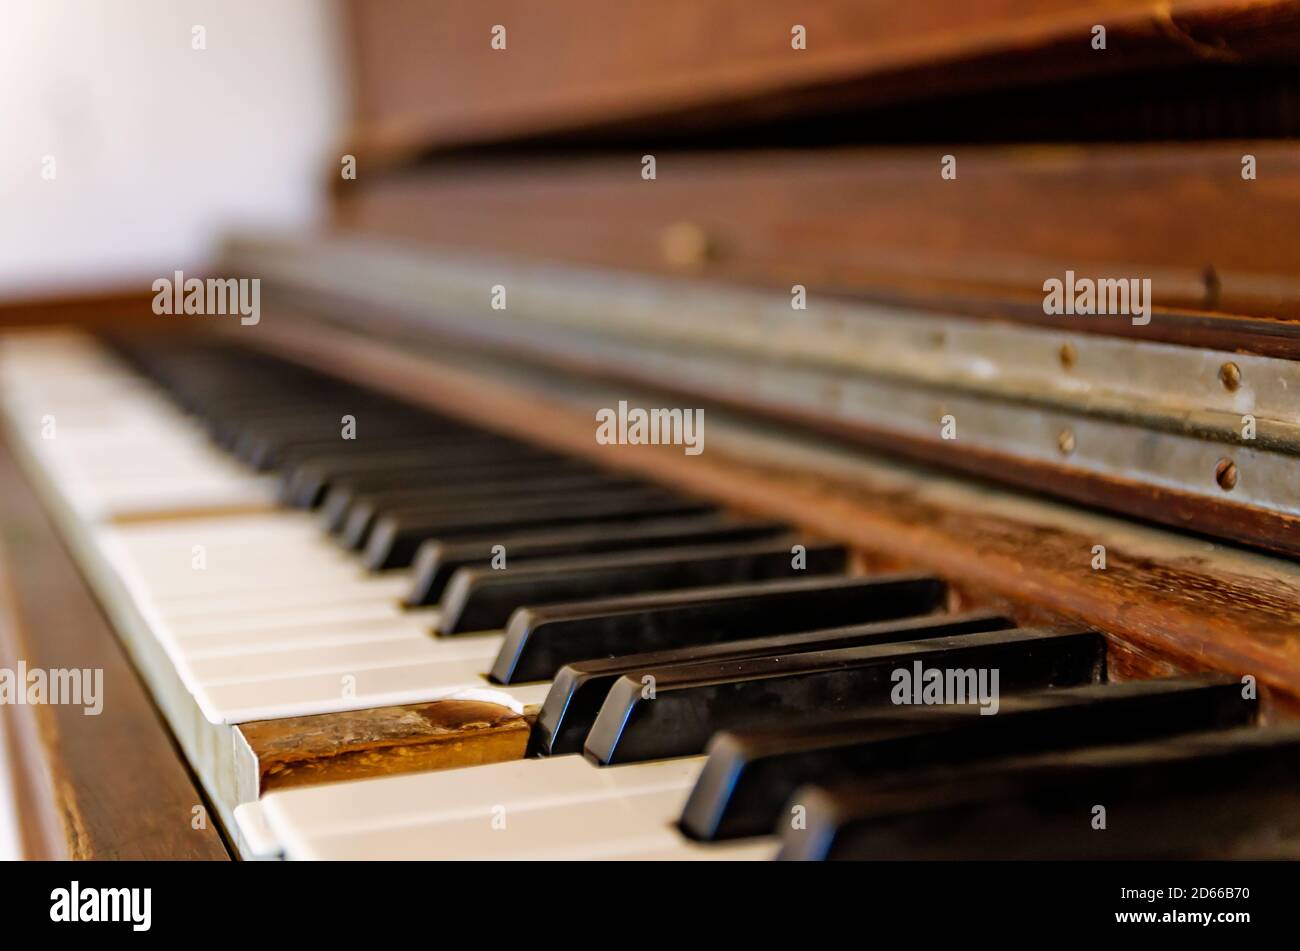 Upright Piano High Resolution Stock Photography and Images - Alamy